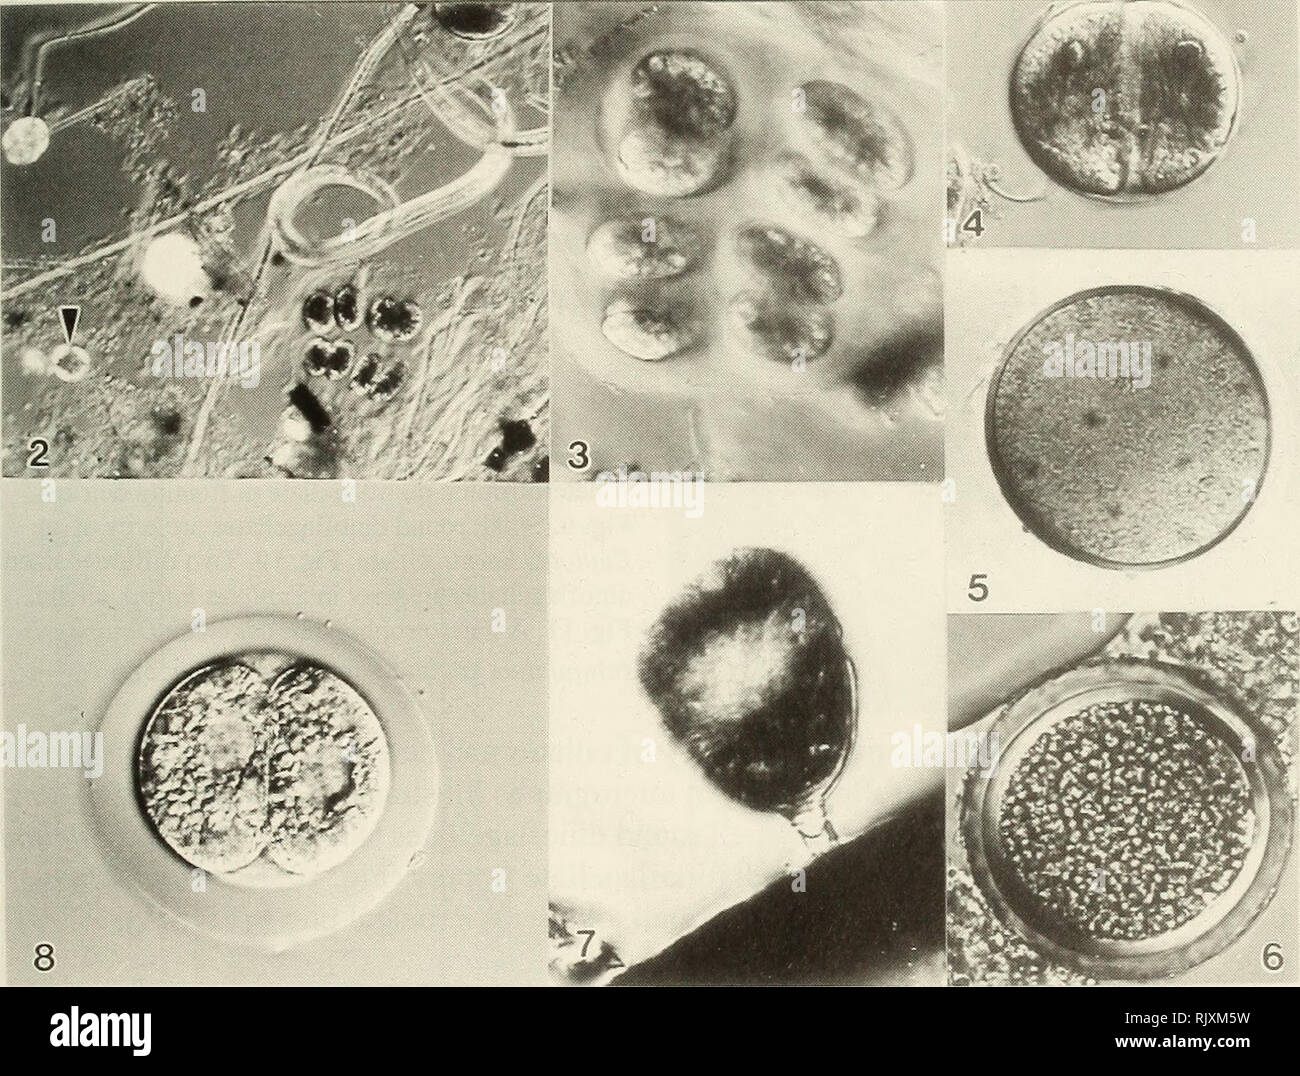 . Atoll research bulletin. Coral reefs and islands; Marine biology; Marine sciences. Association of Microscopic Organisms in Detritus Detritus provides a protective environment which acts as a nursery for diverse species of toxic and nontoxic dinoflagellates and meiofauna. The following light micrographs illustrate the life-cycle stages of dinoflagellates in detritus (Figs 2-8).. Figures 2-8. Life cycle stages and related associations among benthic dinoflagellates present in floating detritus. Floating detritus showing loosely bound fibrous aggregates and life-cycle stages viewed at low (lOOx) Stock Photo